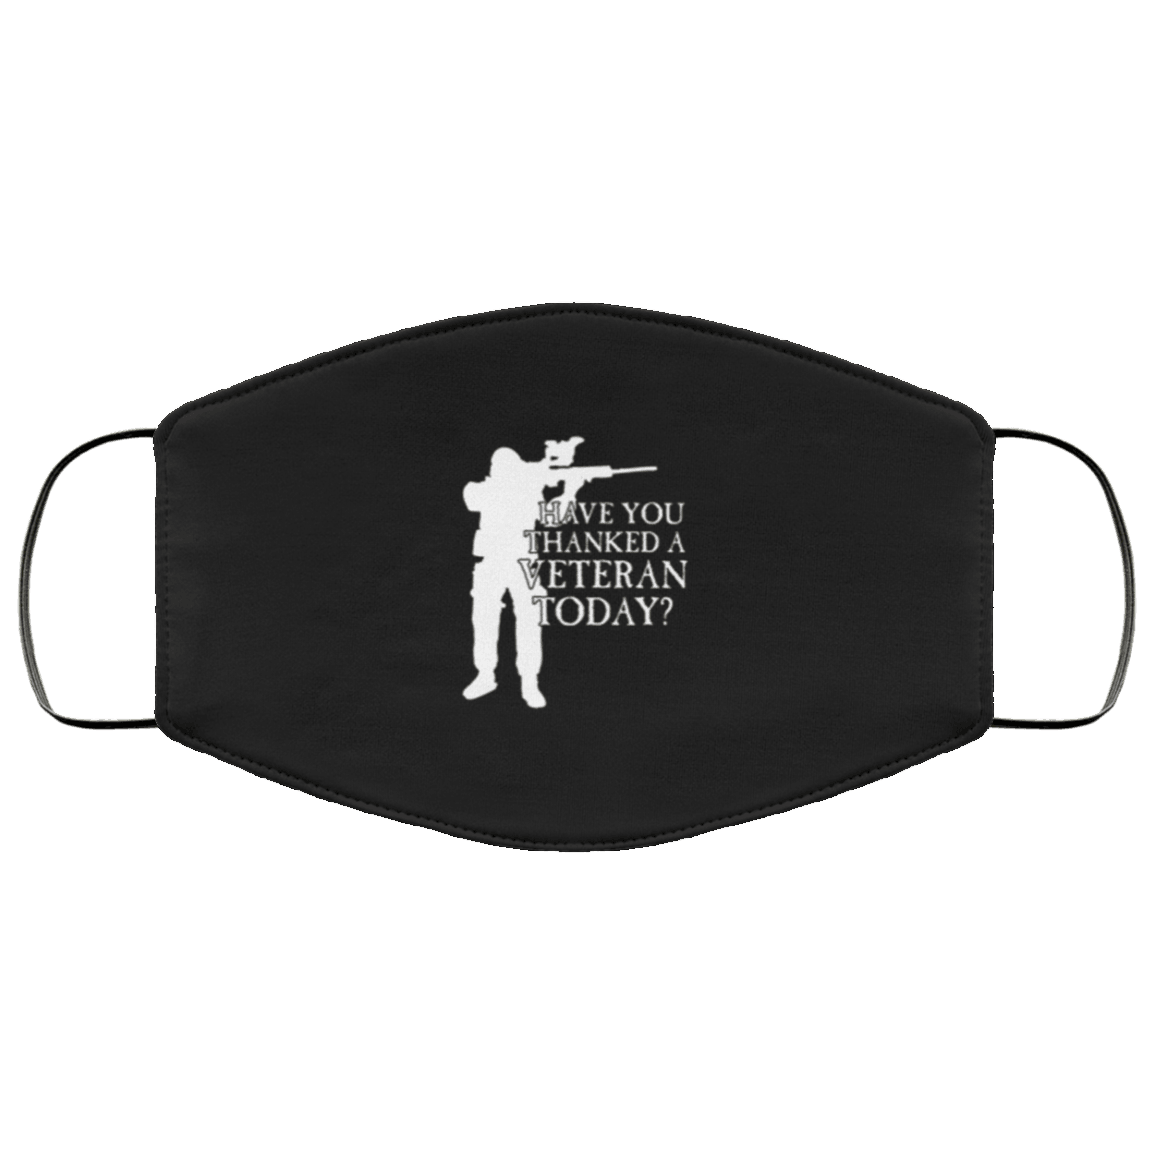 Designs by MyUtopia Shout Out:Have You Thanked A Veteran Today? Adult Fabric Face Mask with Elastic Ear Loops,2 Layer Fabric Face Mask / Black / Adult,Fabric Face Mask